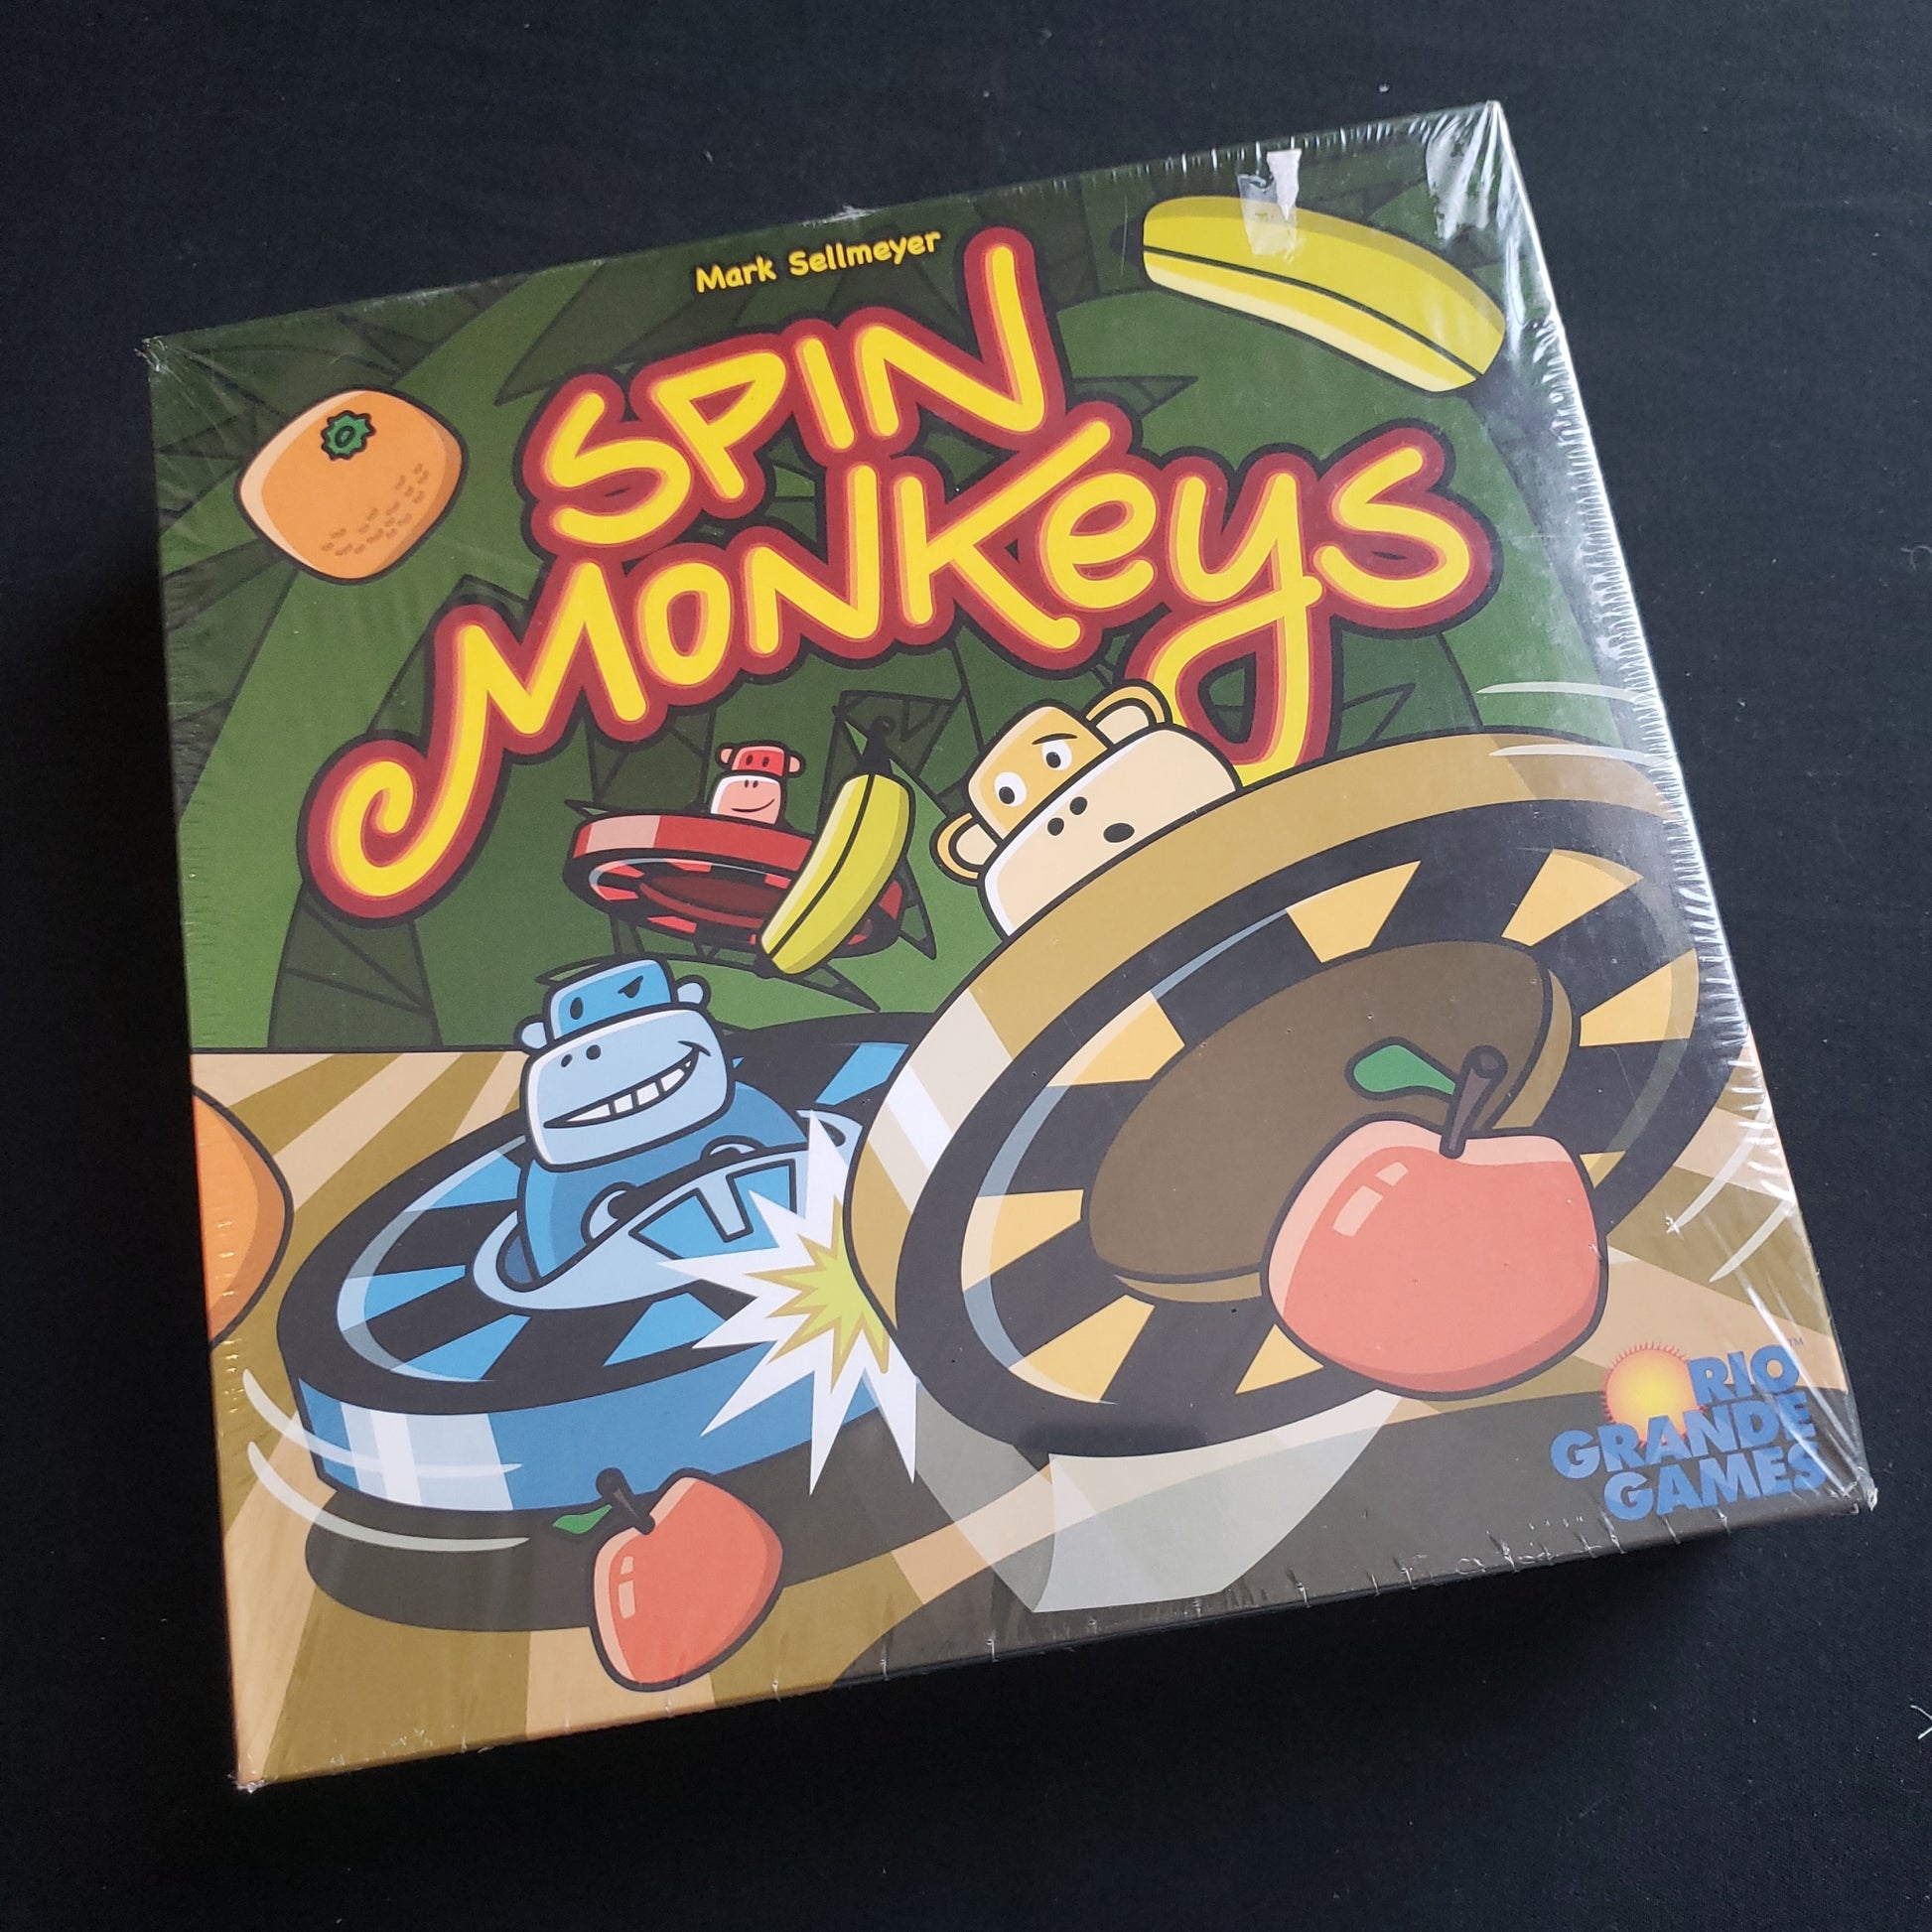 Image shows the front cover of the box of the Spin Monkeys board game